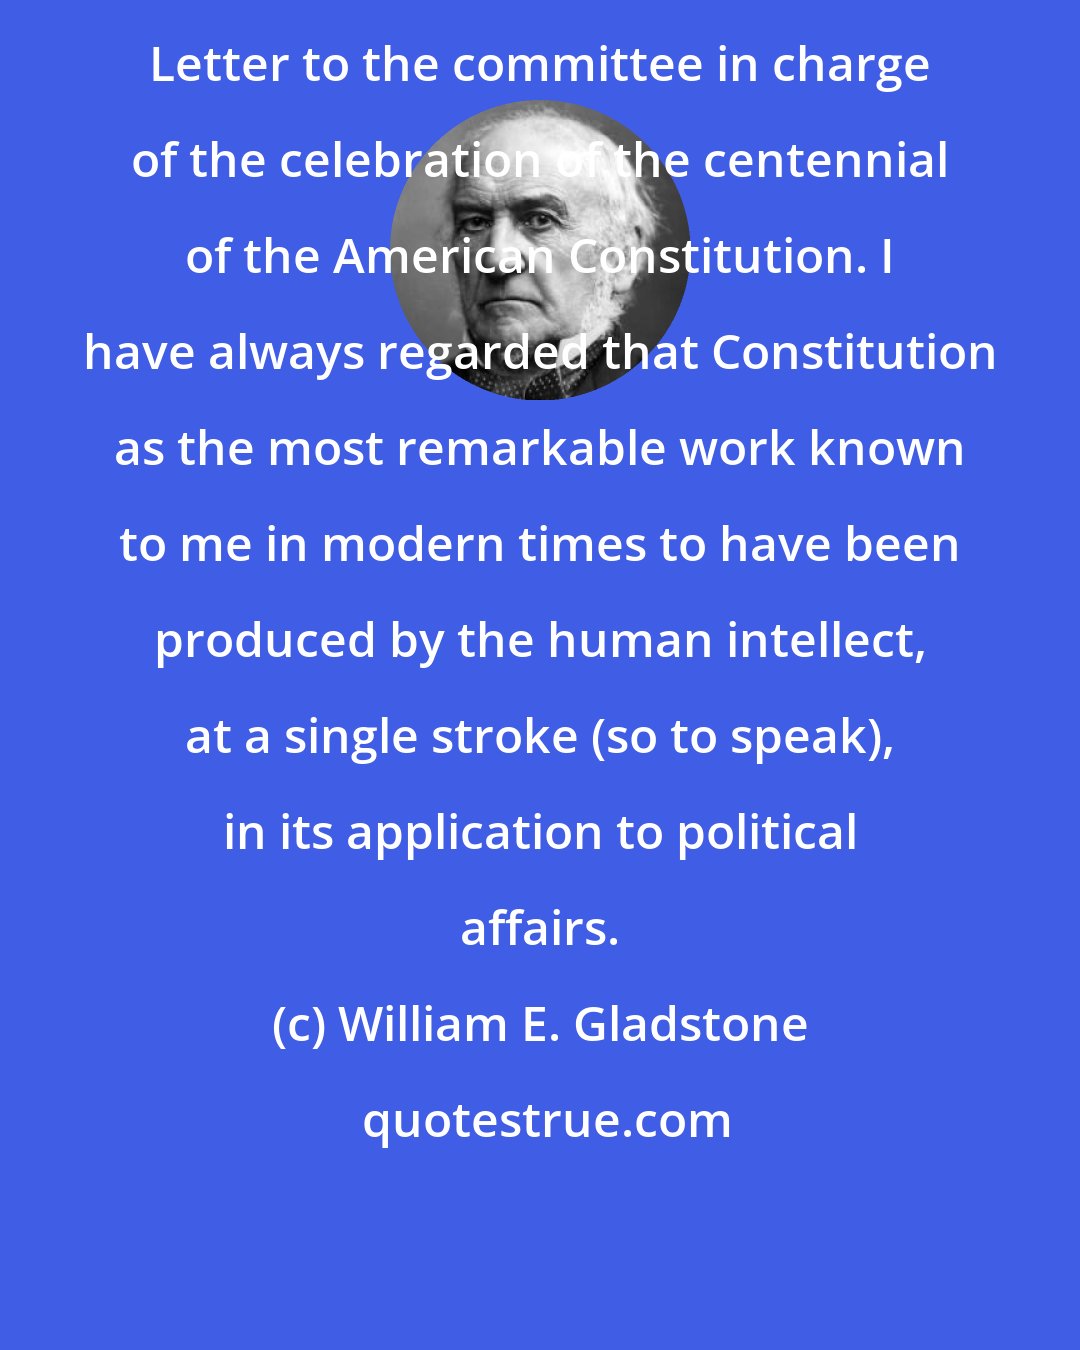 William E. Gladstone: Letter to the committee in charge of the celebration of the centennial of the American Constitution. I have always regarded that Constitution as the most remarkable work known to me in modern times to have been produced by the human intellect, at a single stroke (so to speak), in its application to political affairs.